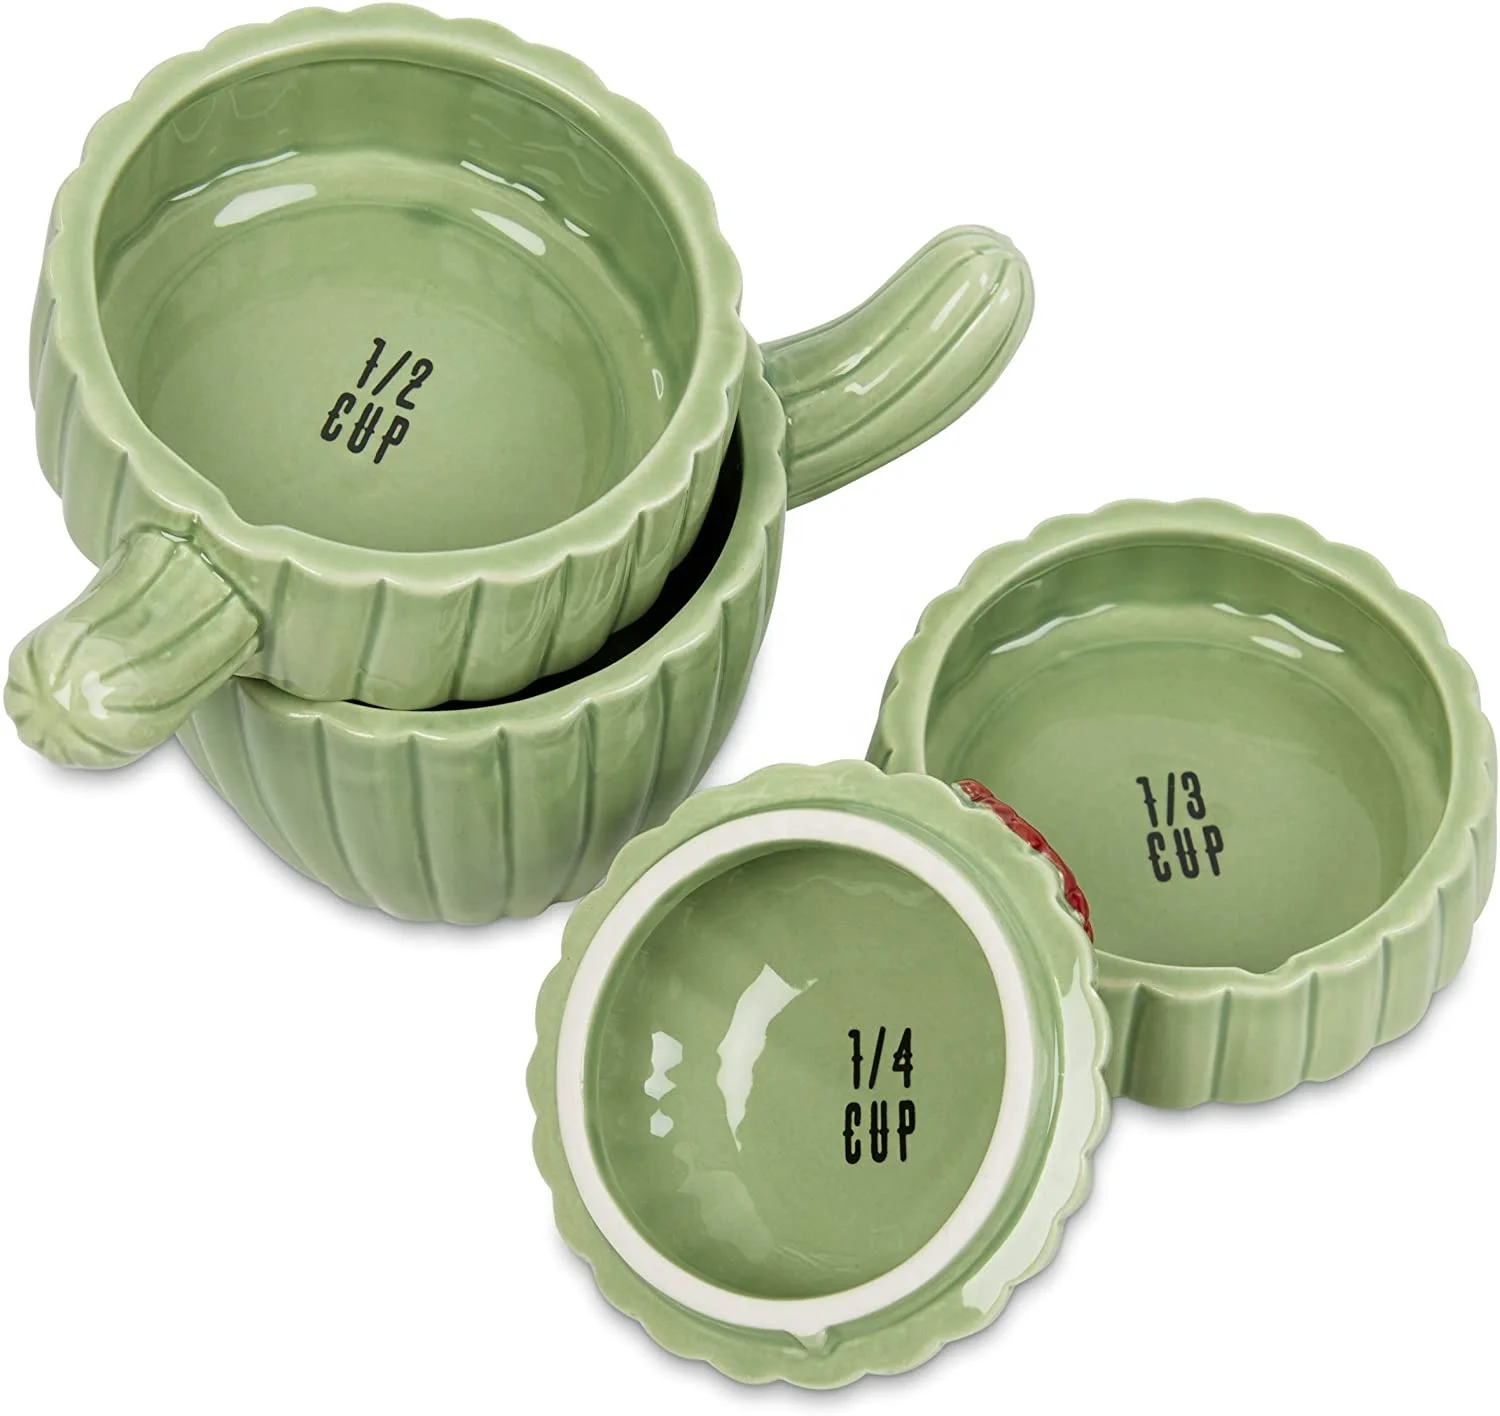 Creative Cactus Ceramic Measuring Cups And Spoon Baking Scale